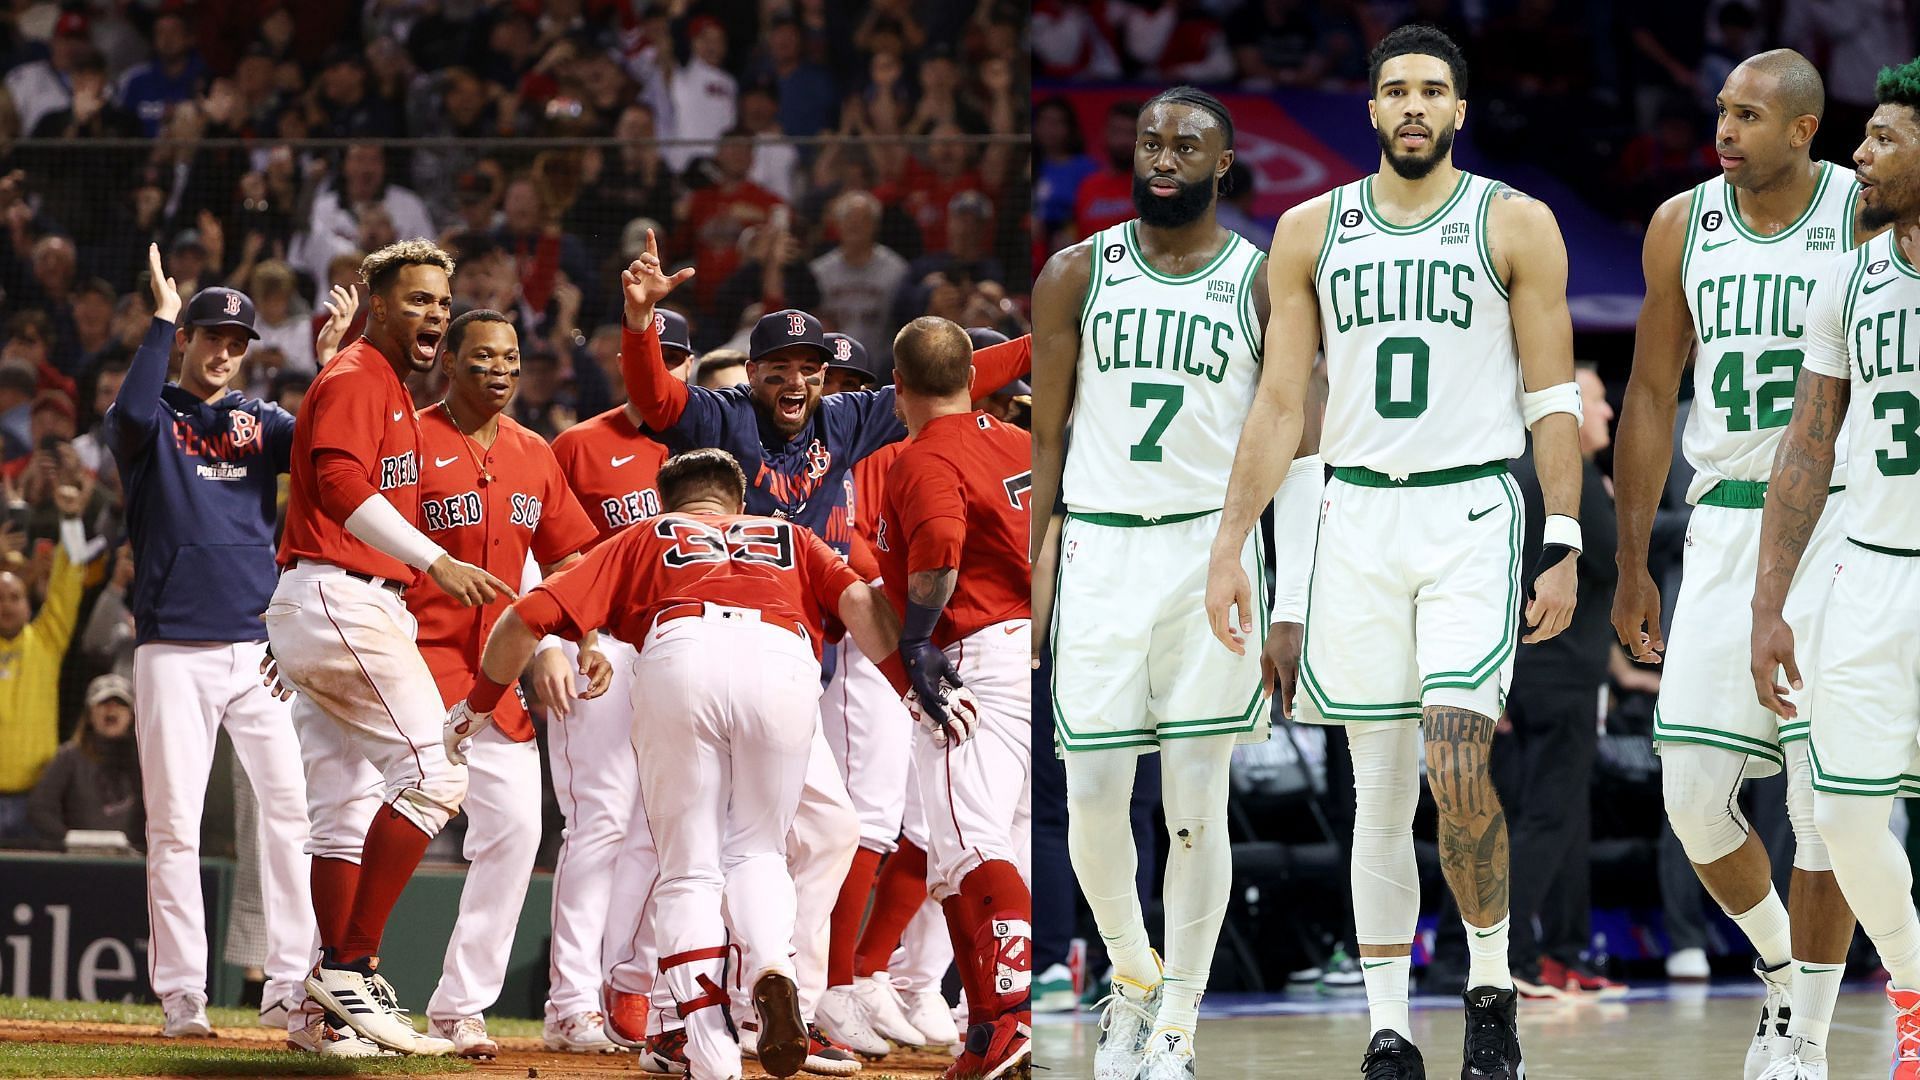 The Boston Celtics are on the verge of doing something that the MLB has not seen since the 2004 Boston Red Sox